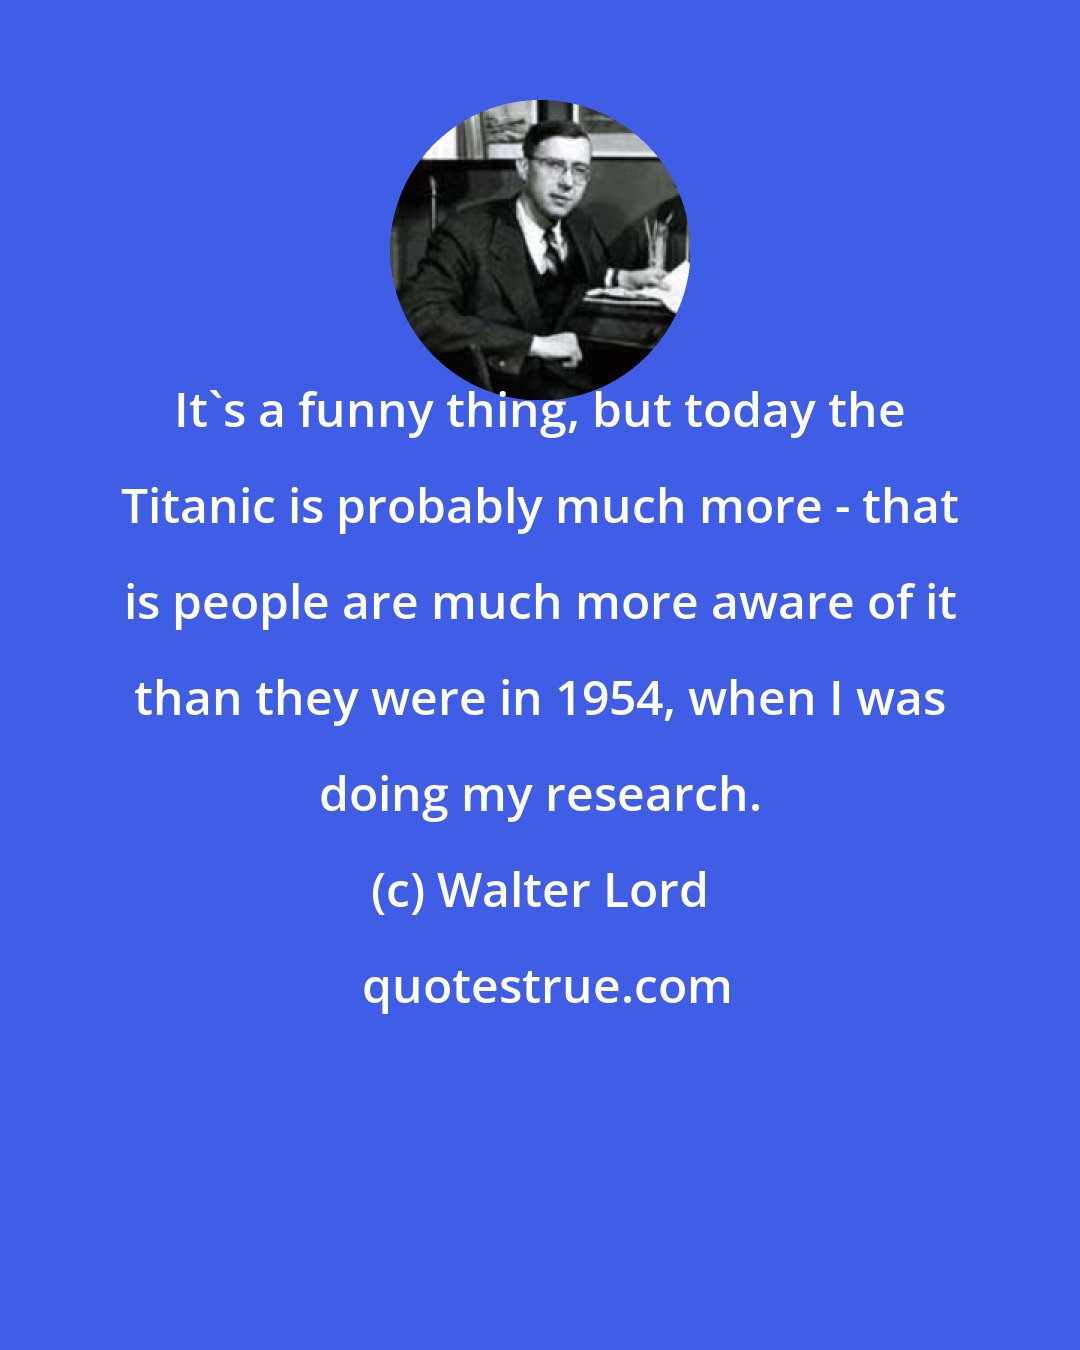 Walter Lord: It's a funny thing, but today the Titanic is probably much more - that is people are much more aware of it than they were in 1954, when I was doing my research.